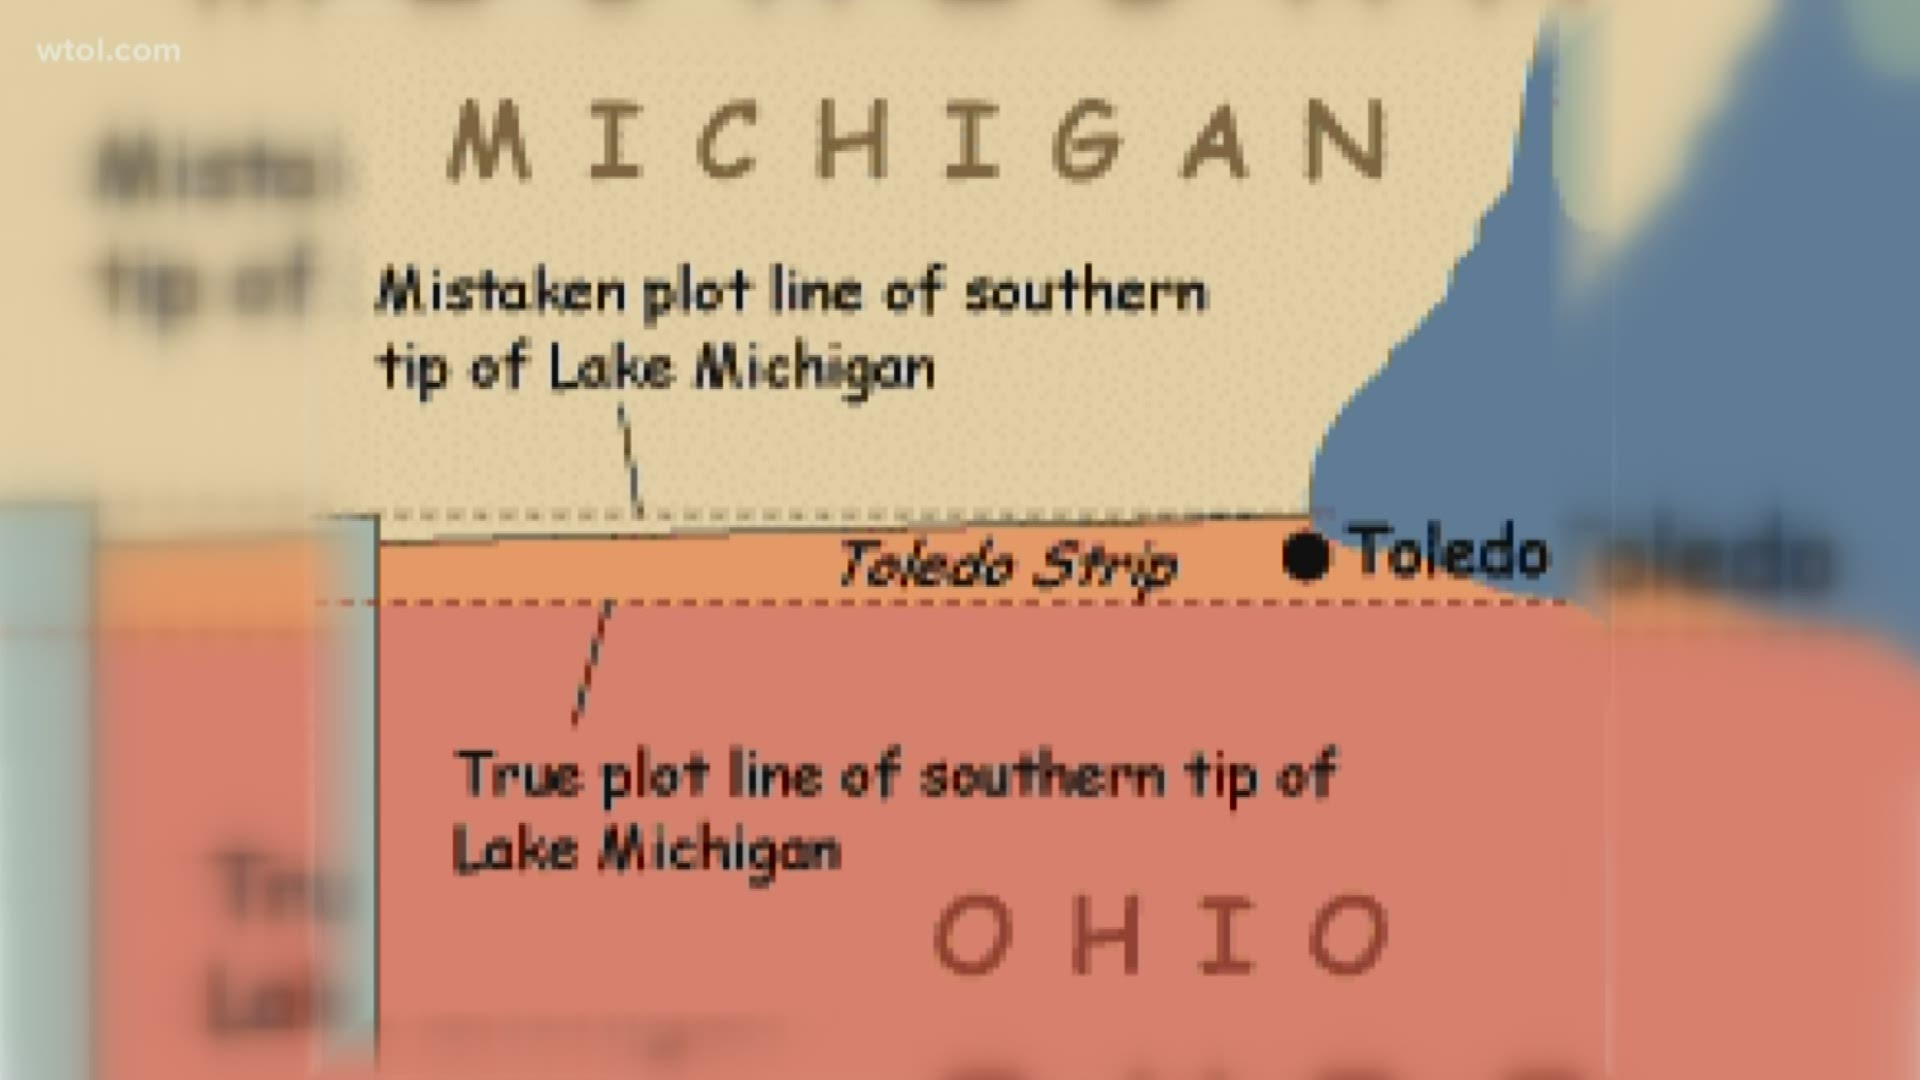 Lou Herbert takes us back to all the origins of the 'Border Battle,' telling us about the history of the rivalry between the Buckeyes and the Wolverines.